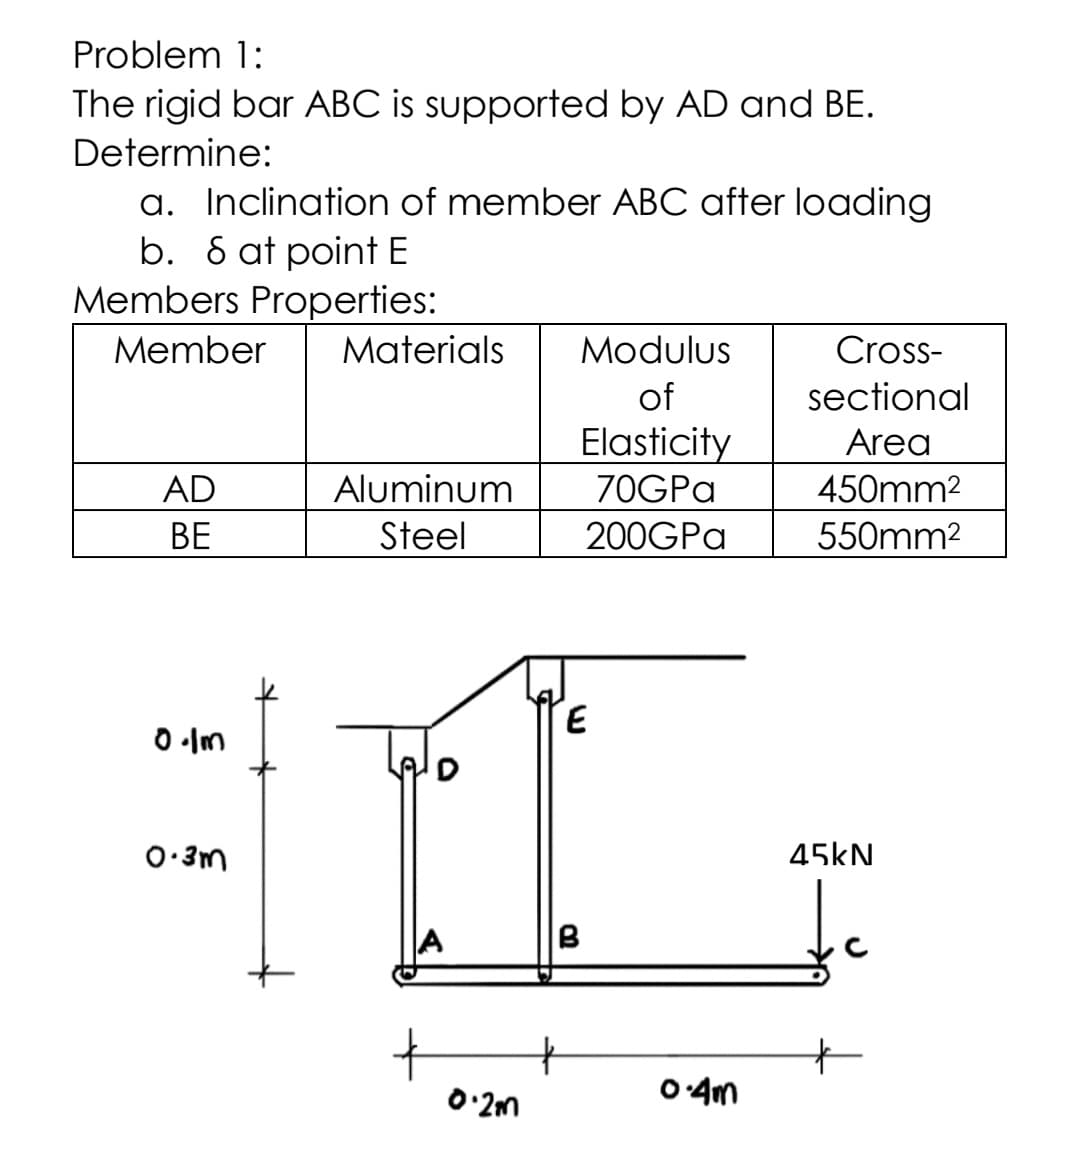 Problem 1:
The rigid bar ABC is supported by AD and BE.
Determine:
a. Inclination of member ABC after loading
b. 8 at point E
Members Properties:
Member
Materials
Modulus
Cross-
sectional
Area
of
Elasticity
AD
Aluminum
70GPA
450mm2
ВЕ
Steel
200GPA
550mm2
E
O •Im
O:3m
45kN.
t
0 4m
